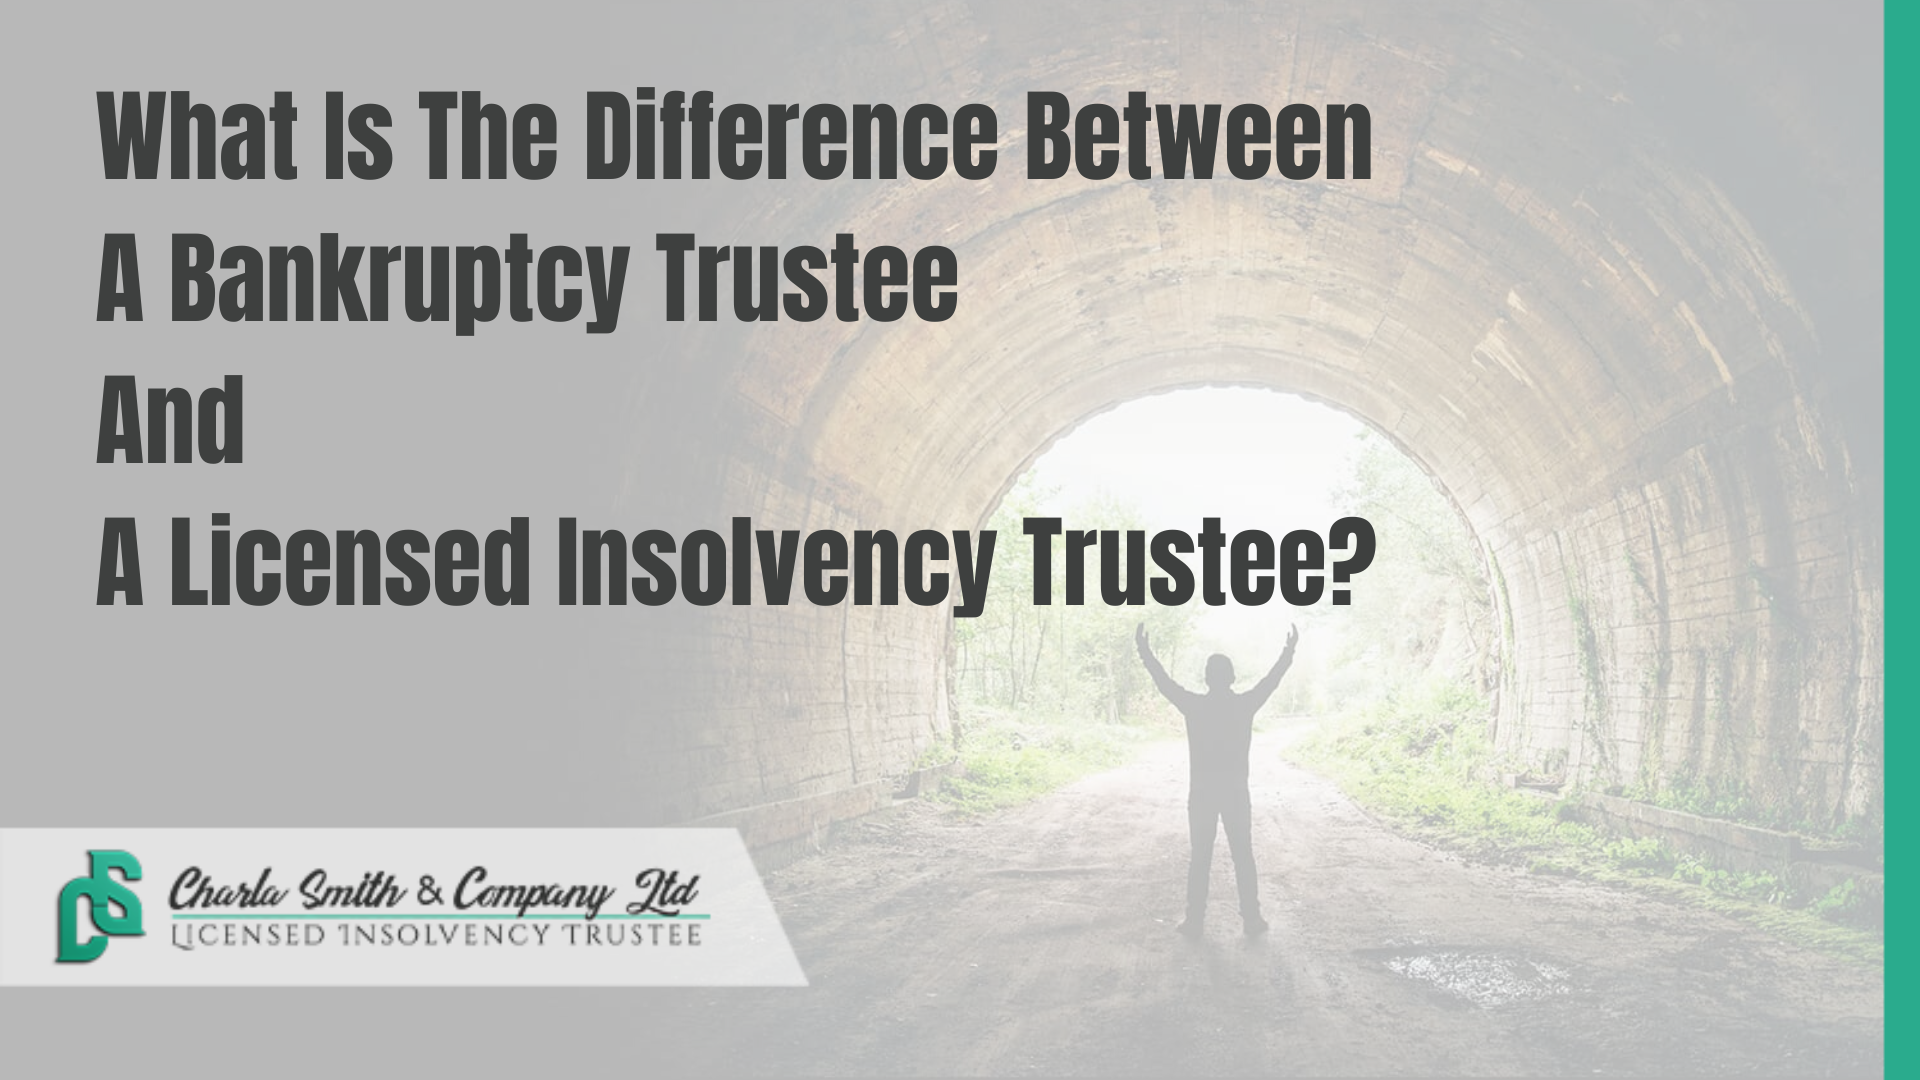 What Is The Difference Between A Bankruptcy Trustee And A Licensed Insolvency Trustee?